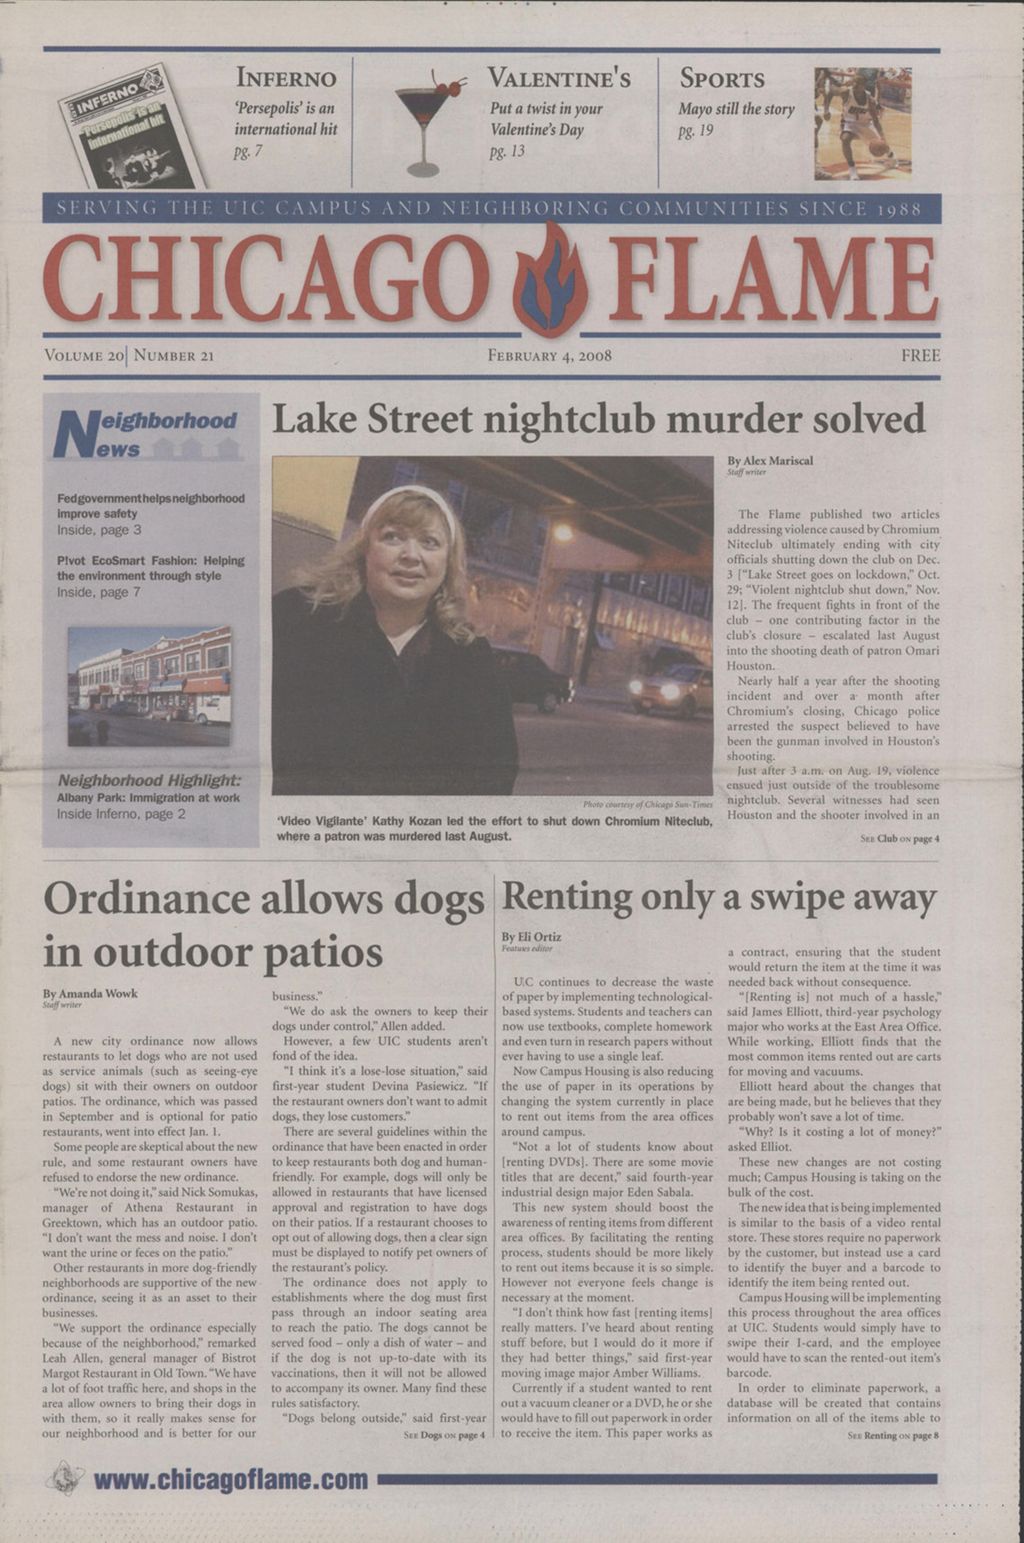 Miniature of Chicago Flame (February 4, 2008)